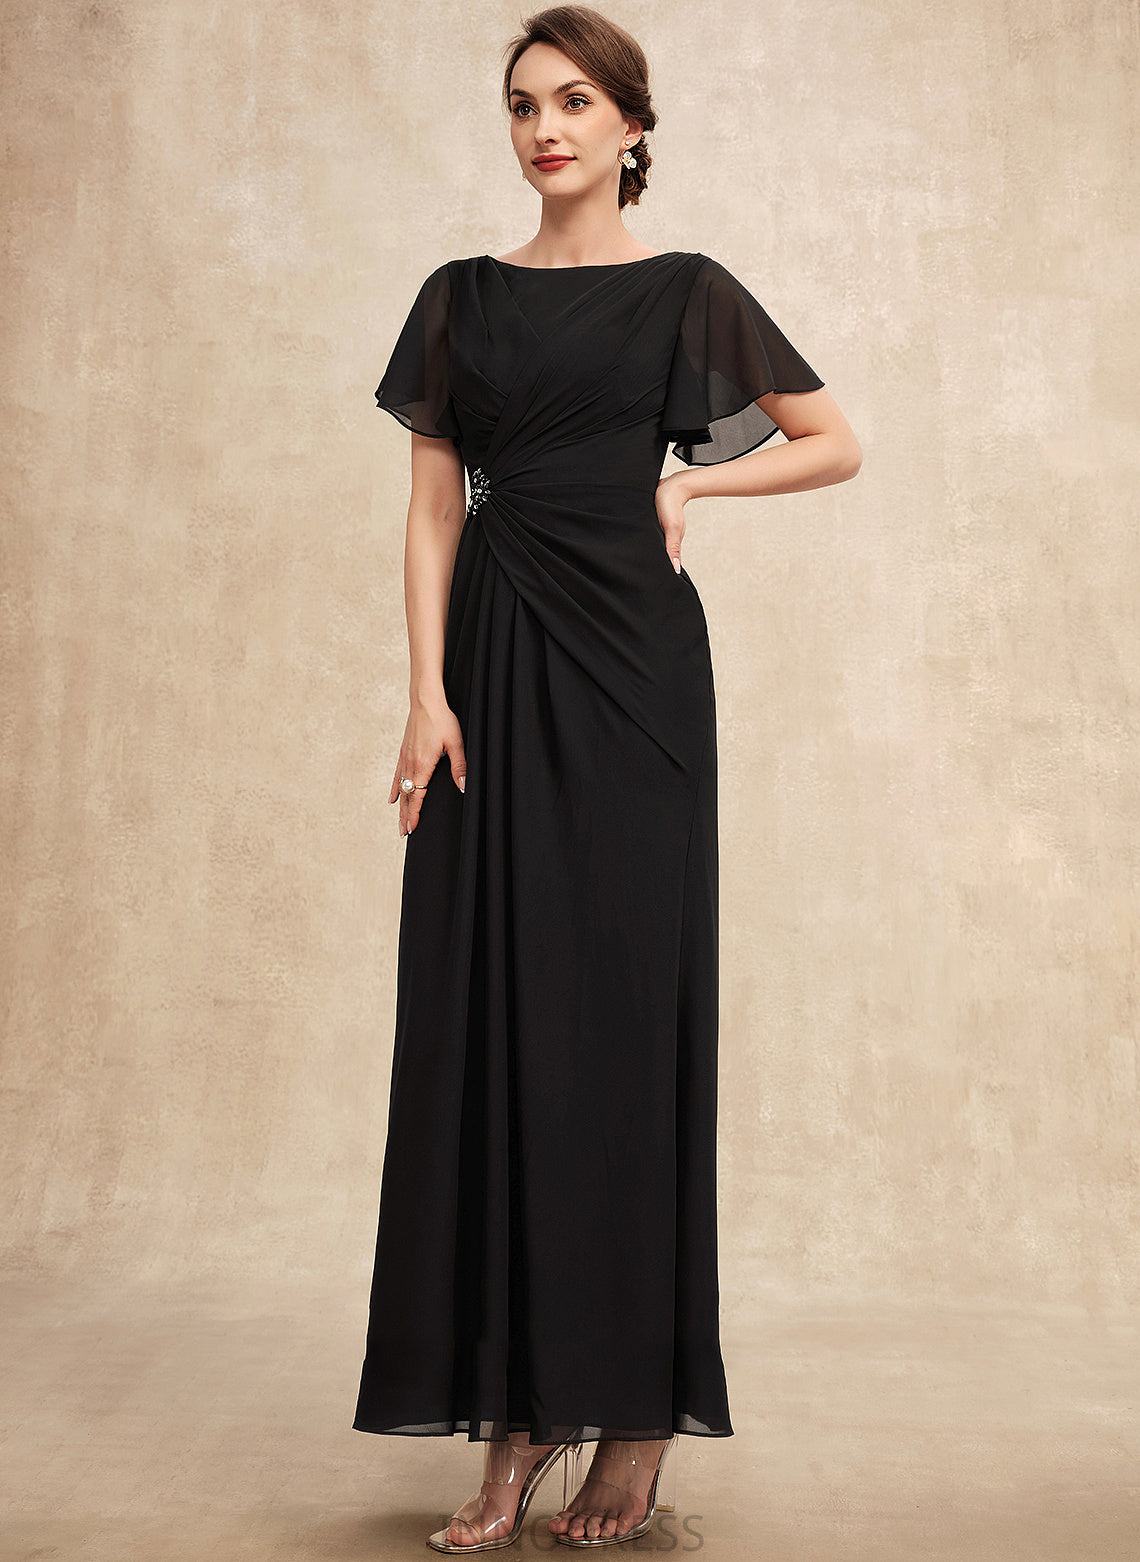 With Ankle-Length the Scoop Mother of the Bride Dresses A-Line Neck Mother Kimberly Bride Ruffle Chiffon Dress of Beading